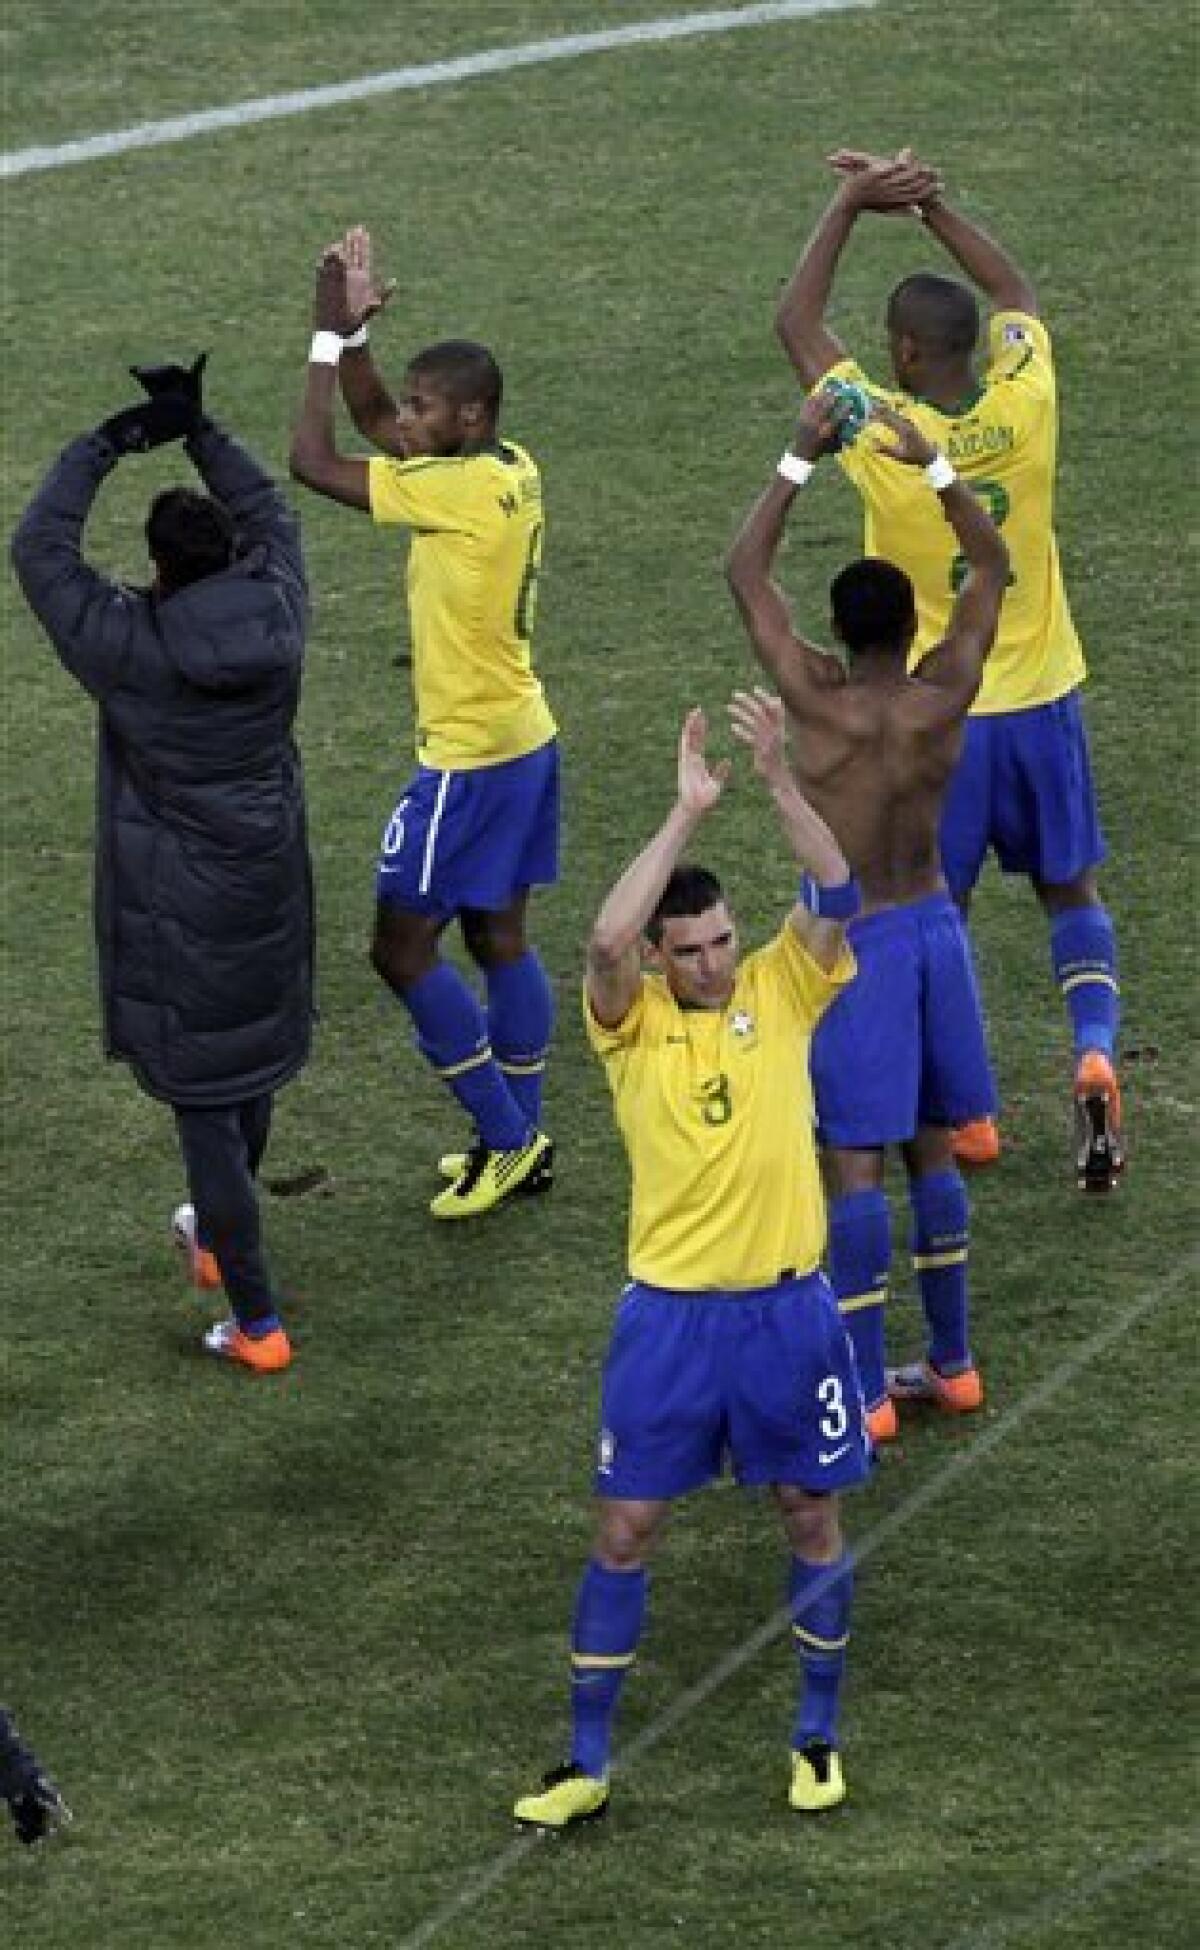 Brazil's players applaud as they leave the pitch after the World Cup group G soccer match between Brazil and Ivory Coast at Soccer City in Johannesburg, South Africa, Sunday, June 20, 2010. (AP Photo/Marcio Jose Sanchez)